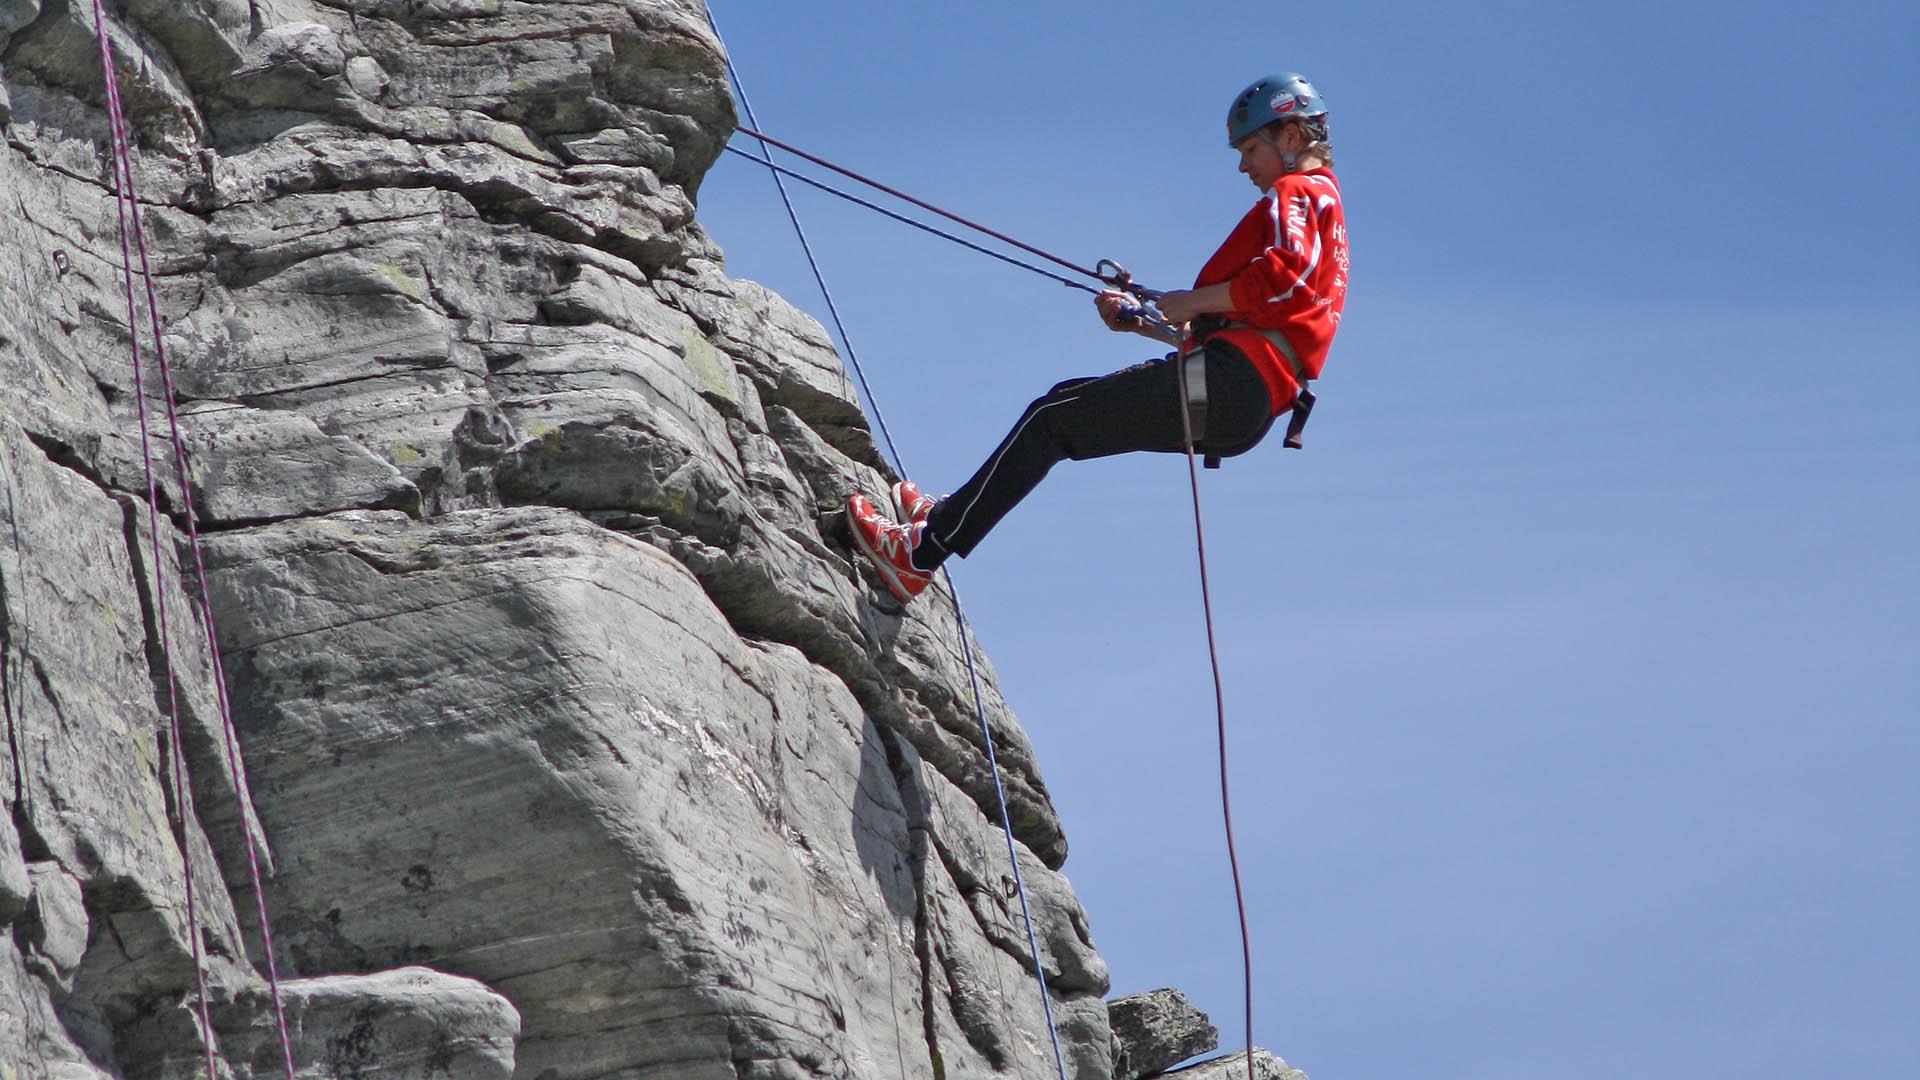 A climber is abseiling on a rock face.